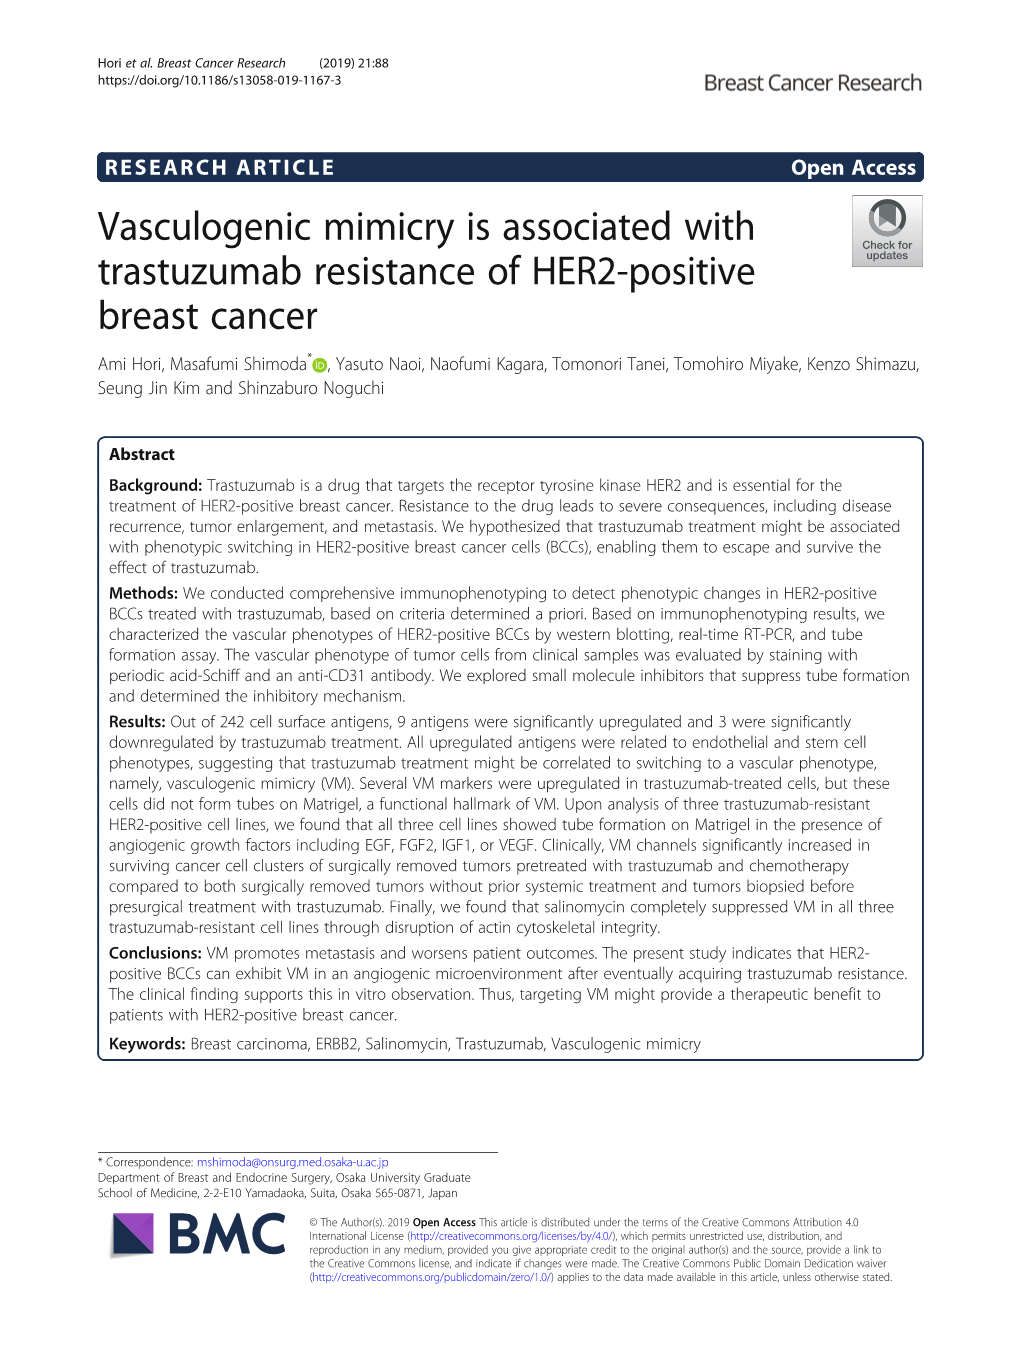 Vasculogenic Mimicry Is Associated with Trastuzumab Resistance Of